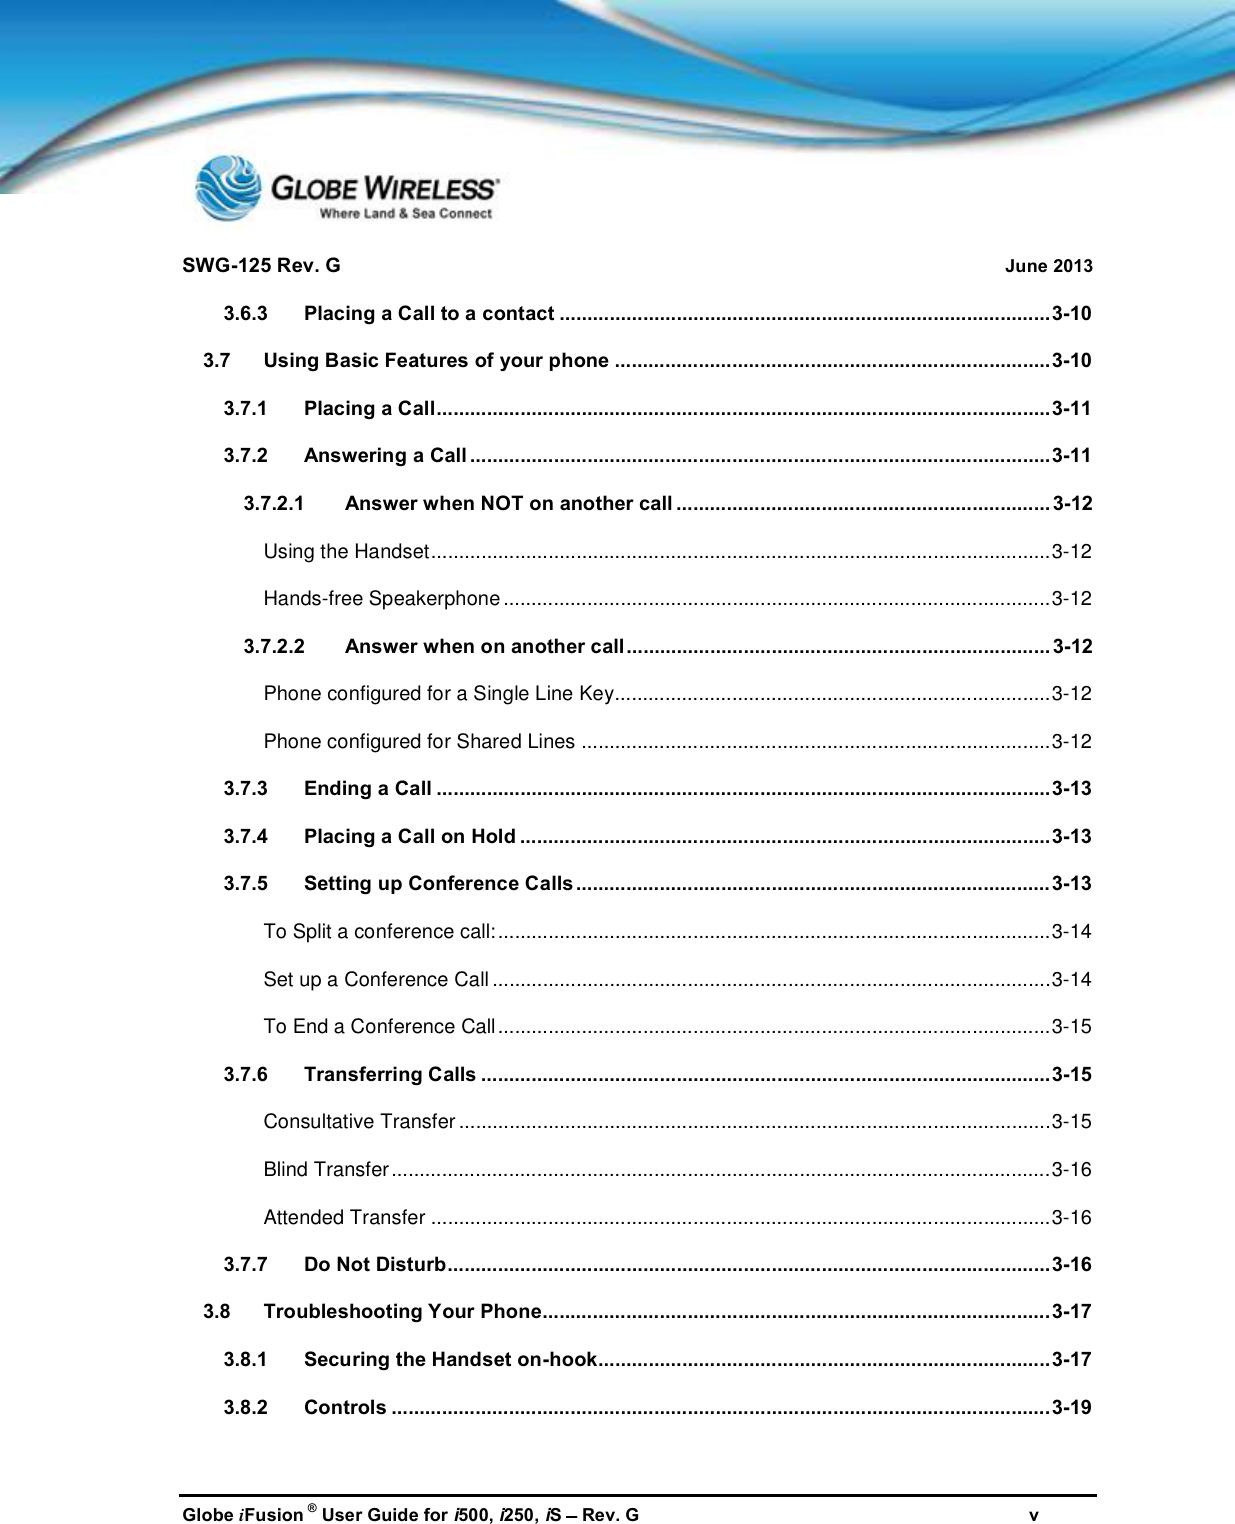 SWG-125 Rev. G June 2013Globe iFusion ®User Guide for i500, i250, iSRev. G v3.6.3 Placing a Call to a contact ........................................................................................3-103.7 Using Basic Features of your phone ..............................................................................3-103.7.1 Placing a Call..............................................................................................................3-113.7.2 Answering a Call ........................................................................................................3-113.7.2.1 Answer when NOT on another call ................................................................... 3-12Using the Handset...............................................................................................................3-12Hands-free Speakerphone..................................................................................................3-123.7.2.2 Answer when on another call............................................................................ 3-12Phone configured for a Single Line Key..............................................................................3-12Phone configured for Shared Lines ....................................................................................3-123.7.3 Ending a Call ..............................................................................................................3-133.7.4 Placing a Call on Hold ...............................................................................................3-133.7.5 Setting up Conference Calls.....................................................................................3-13To Split a conference call:...................................................................................................3-14Set up a Conference Call ....................................................................................................3-14To End a Conference Call...................................................................................................3-153.7.6 Transferring Calls ......................................................................................................3-15Consultative Transfer ..........................................................................................................3-15Blind Transfer......................................................................................................................3-16Attended Transfer ...............................................................................................................3-163.7.7 Do Not Disturb............................................................................................................3-163.8 Troubleshooting Your Phone...........................................................................................3-173.8.1 Securing the Handset on-hook.................................................................................3-173.8.2 Controls ......................................................................................................................3-19